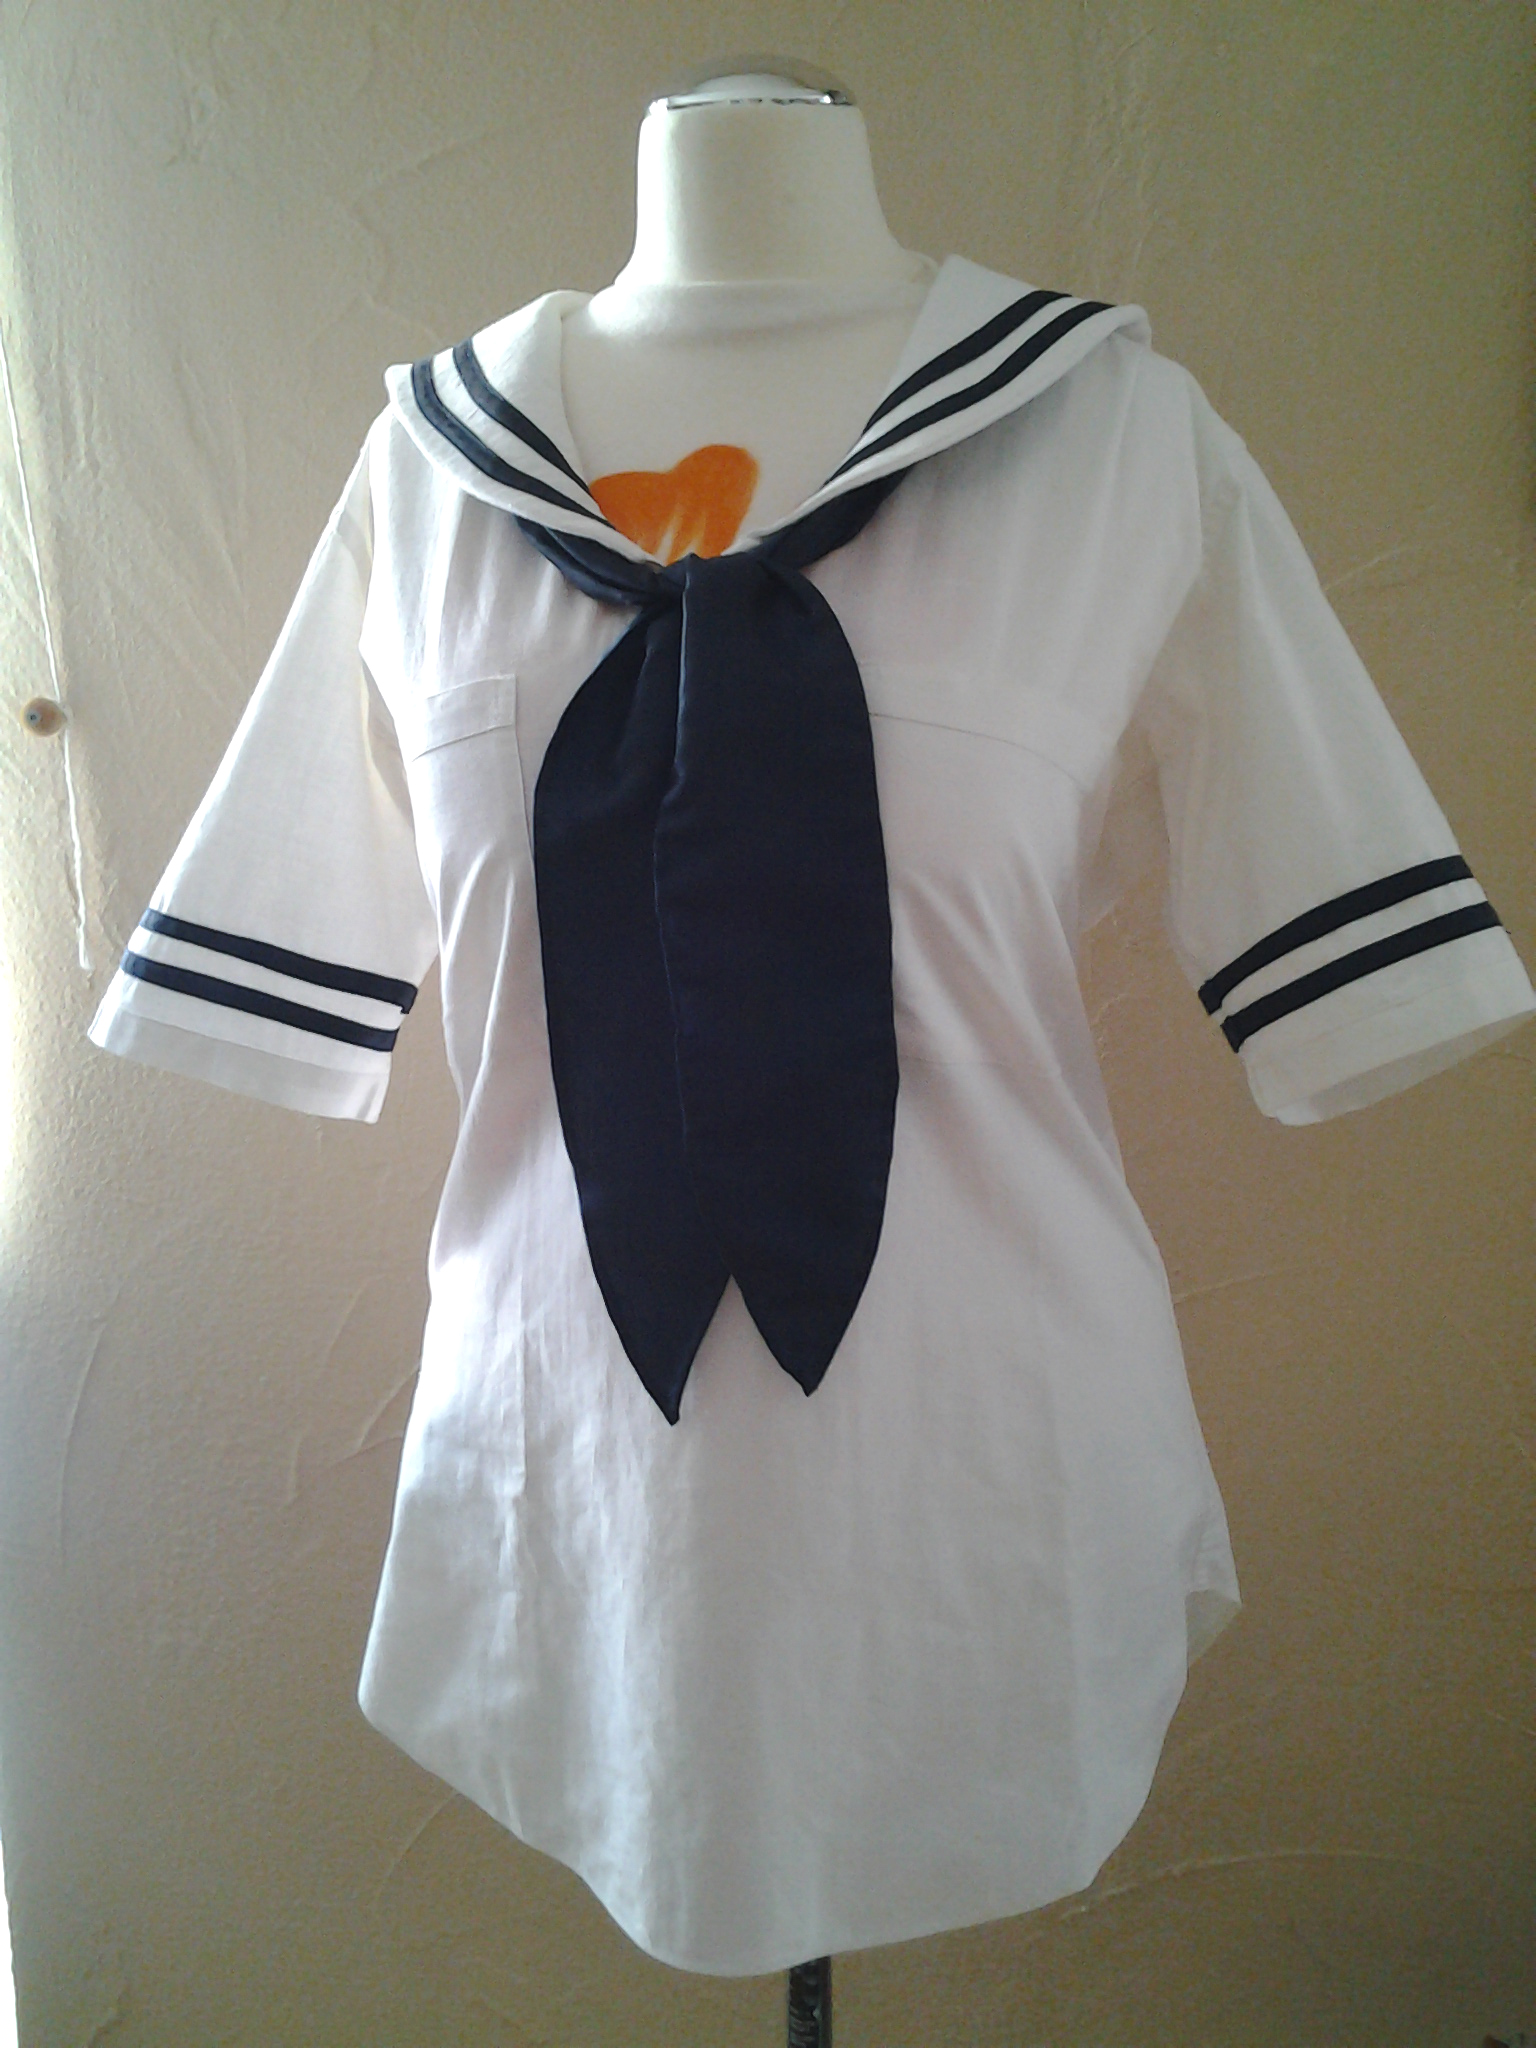 Sailor-collar to old blouse – Sewing Projects | BurdaStyle.com